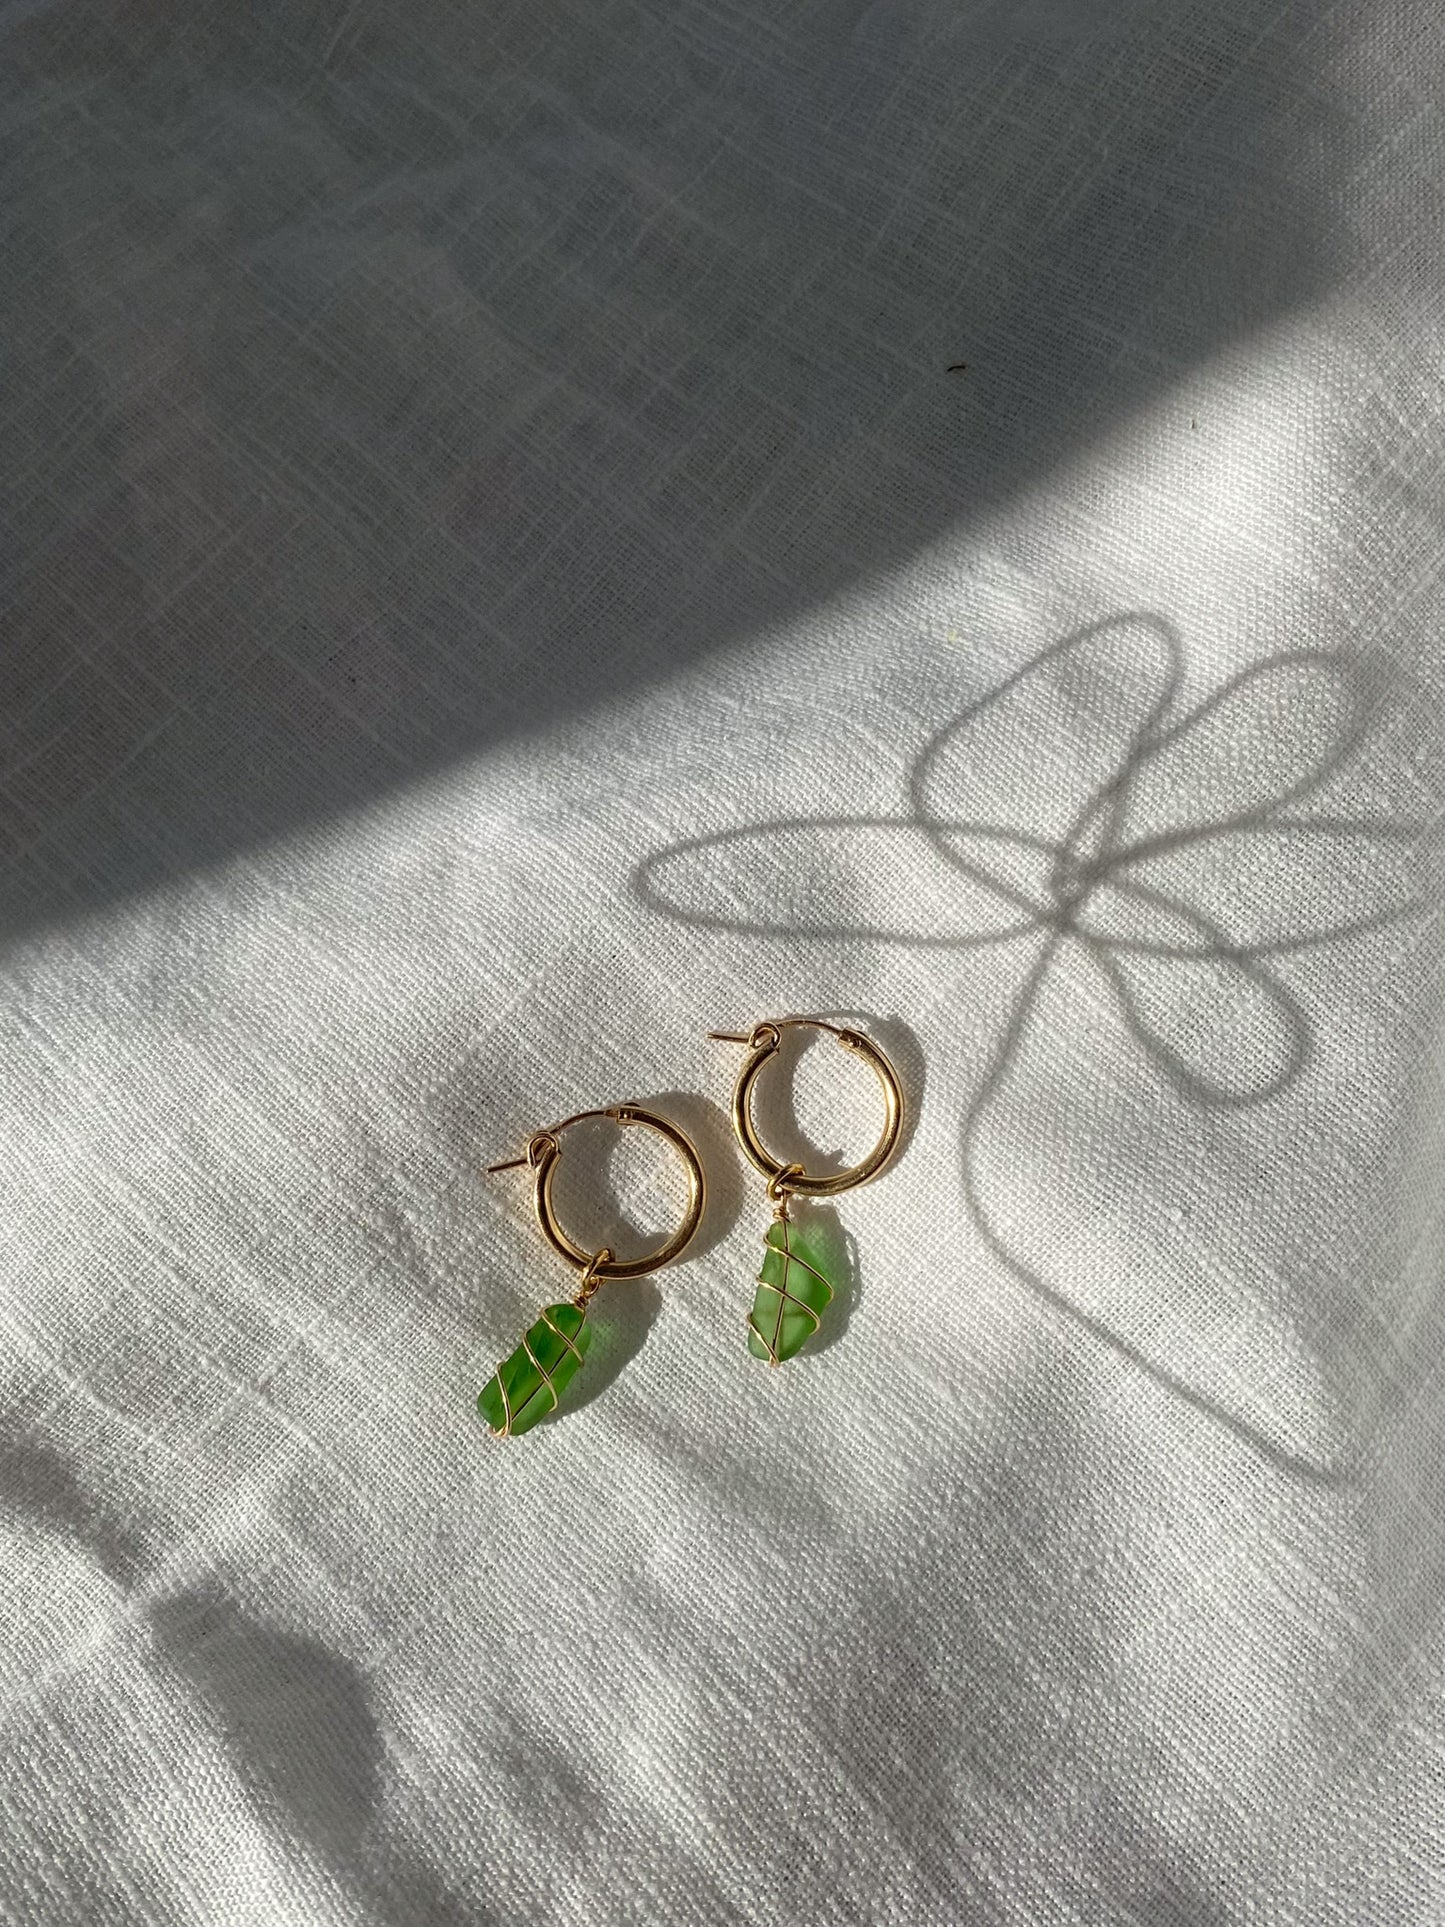 Leone Hoops in Gold Filled & Bright Green